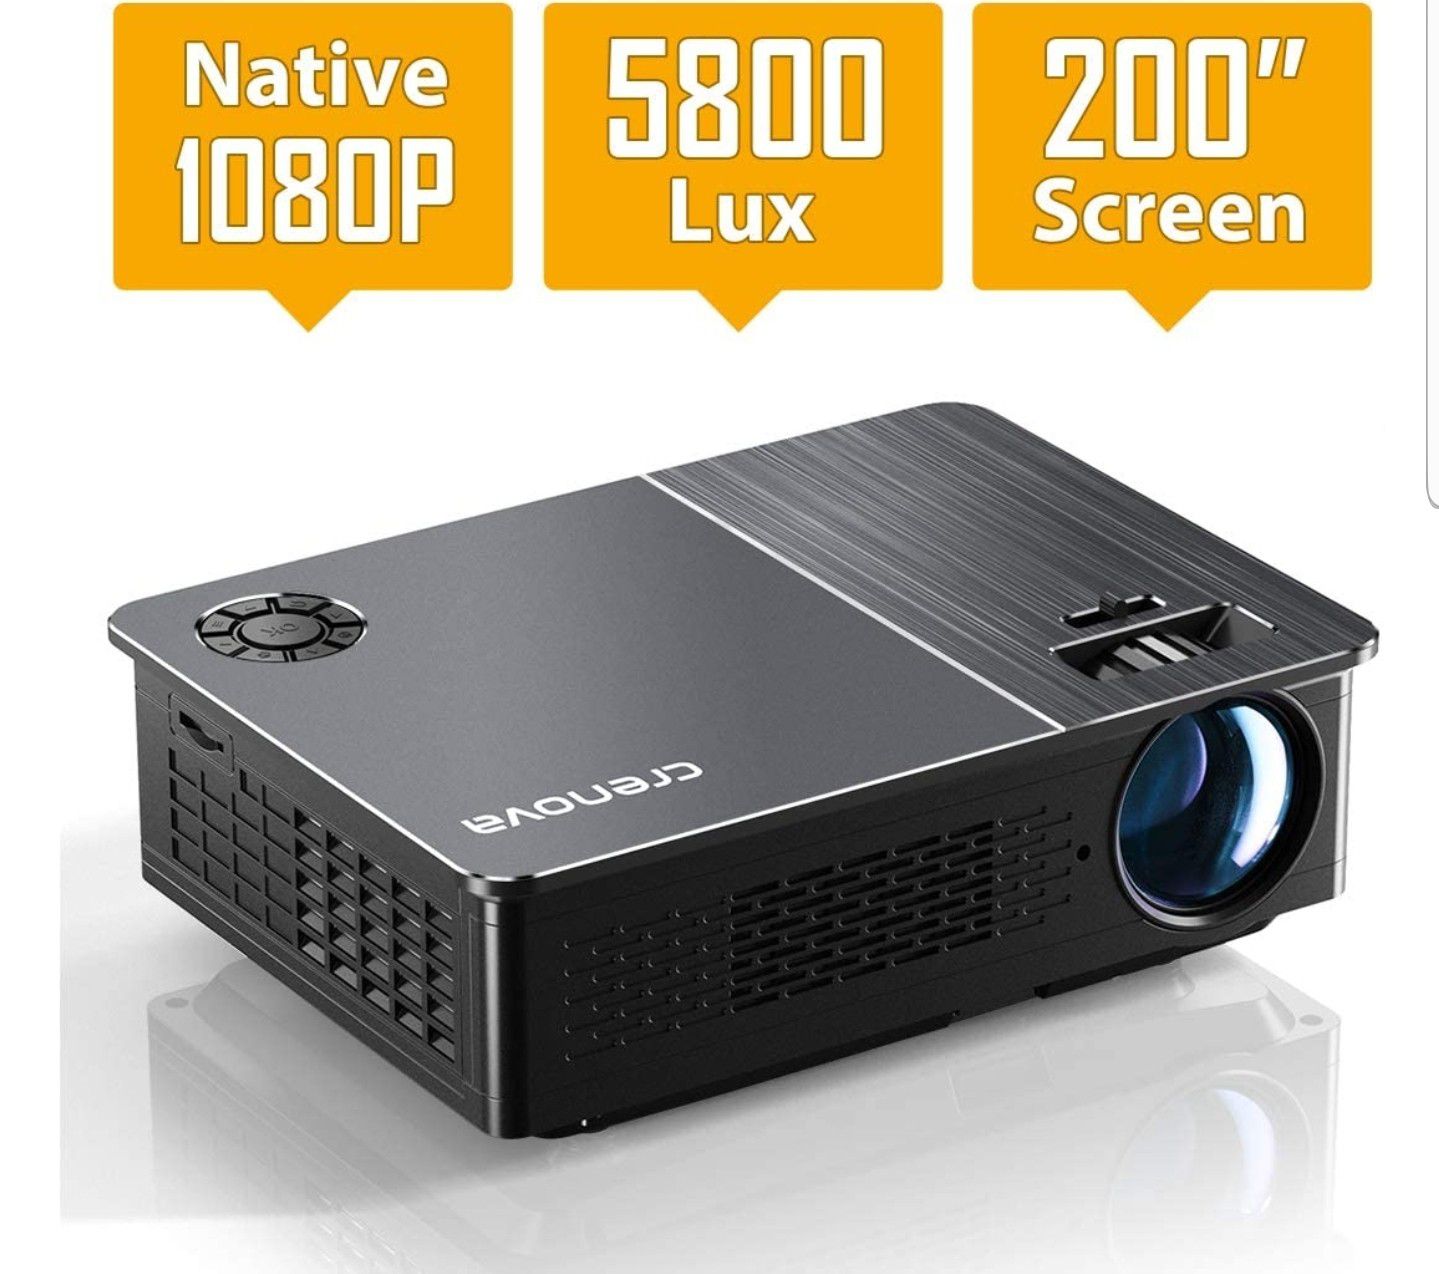 Native 1080P Projector, Crenova HD Video Projector, 5800 Lux LED Movie Projector with 200" Display, Compatible with TV Stick, HDMI, VGA, USB